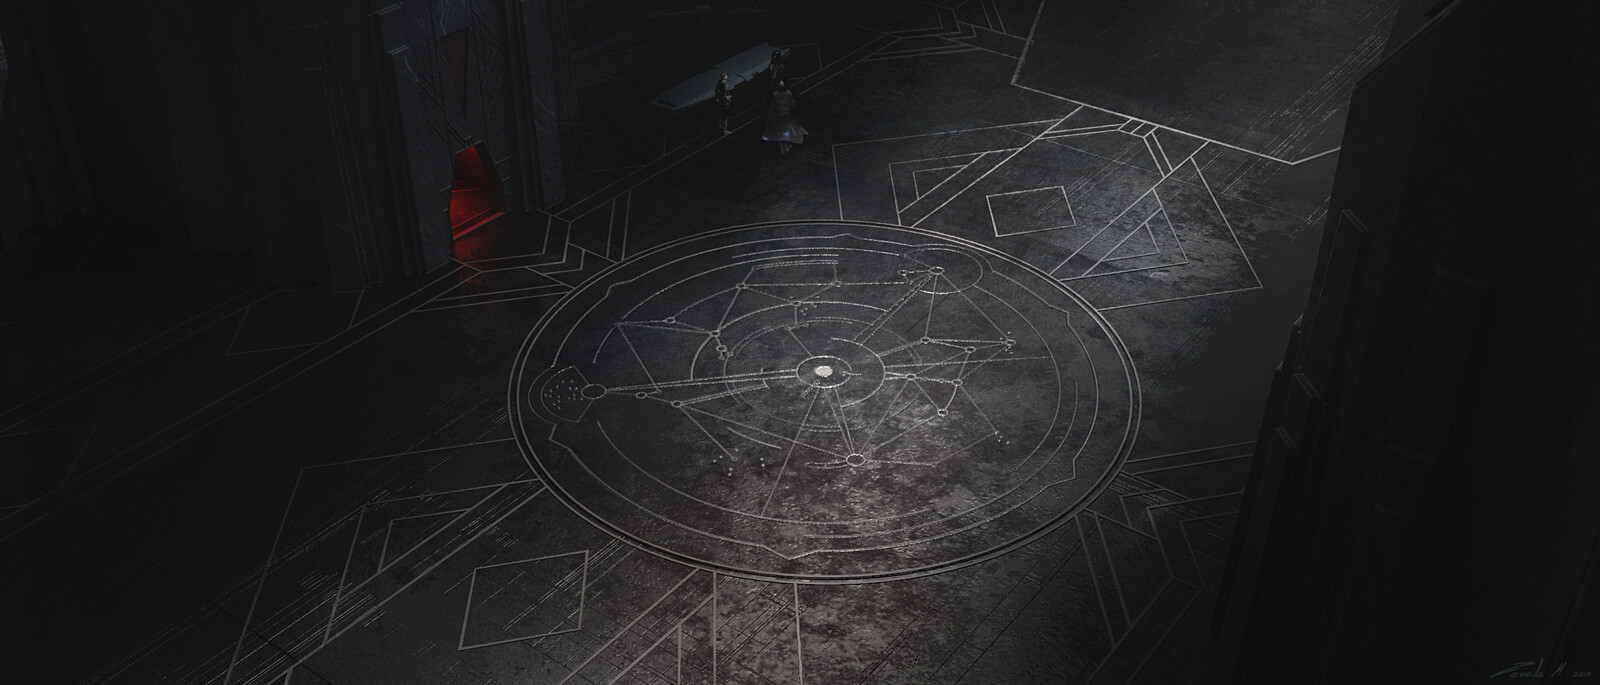 Pattern in the center of the room is a stylized galactic map.